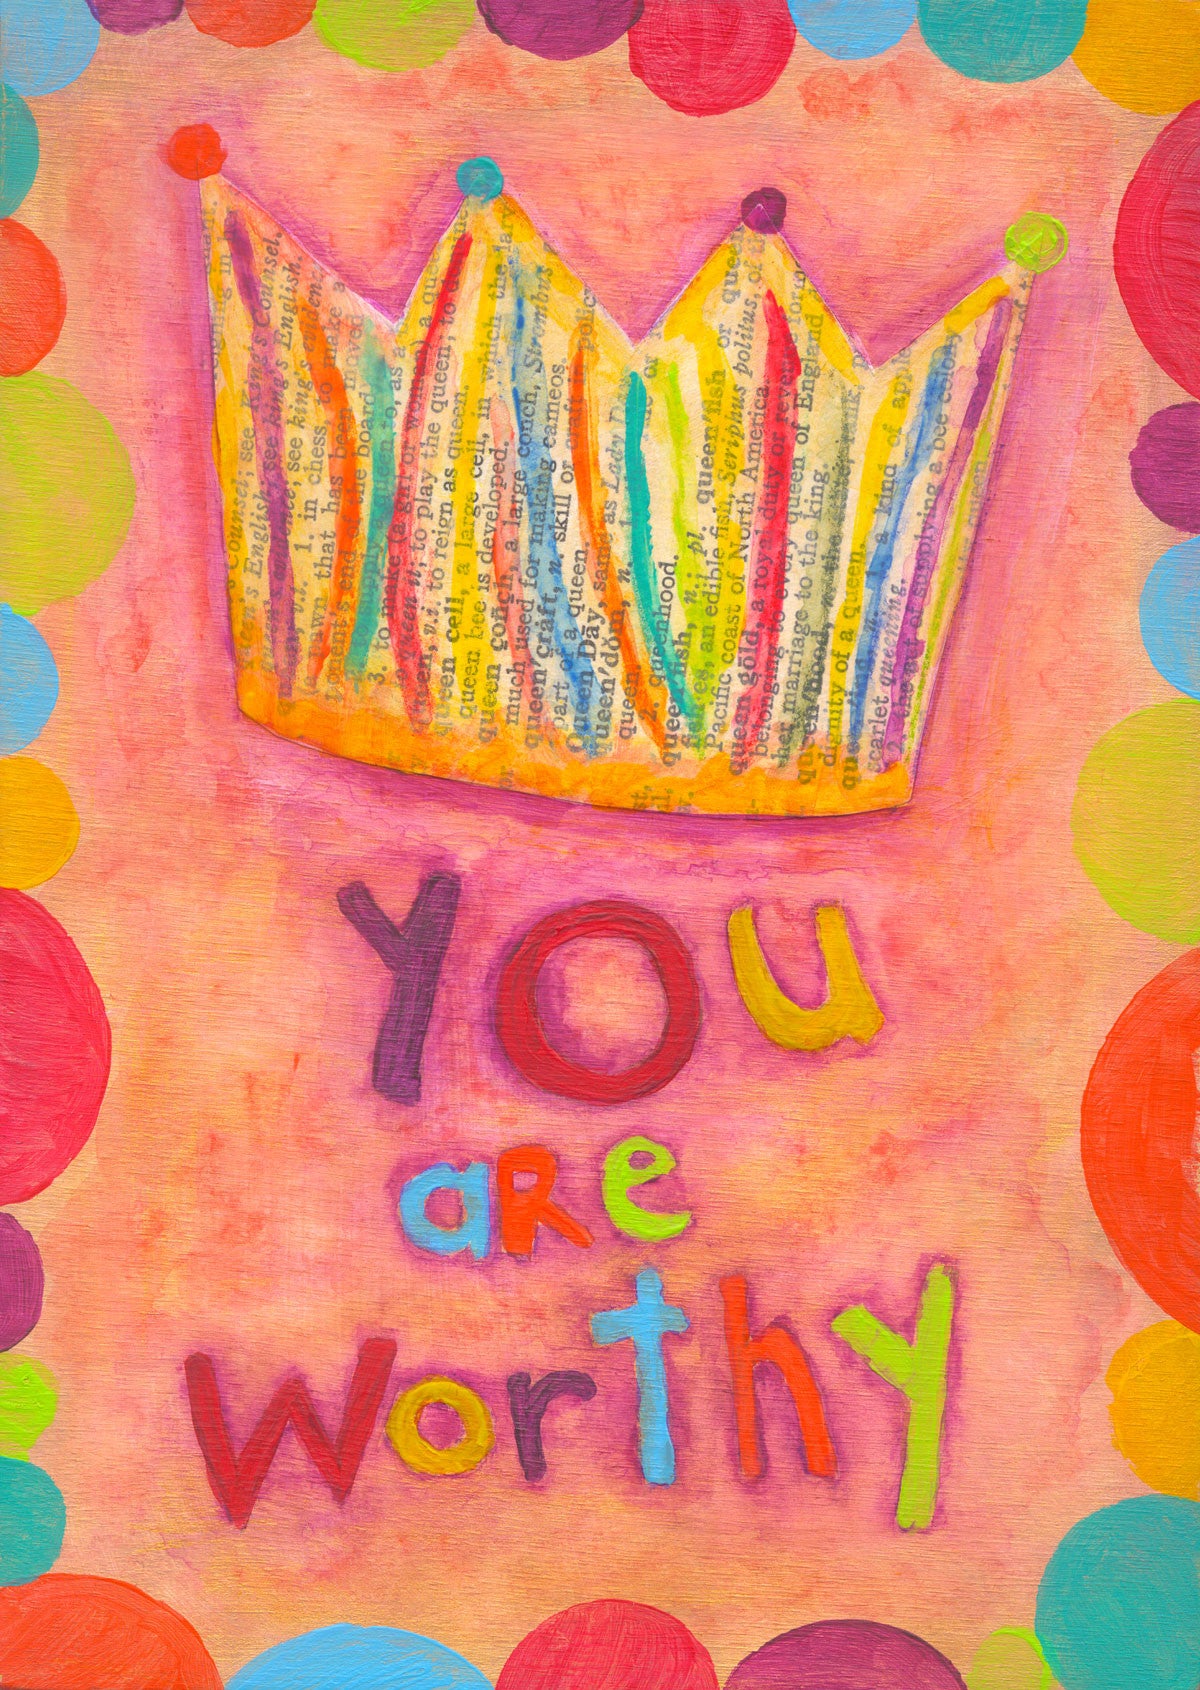 You Are Worthy - Print